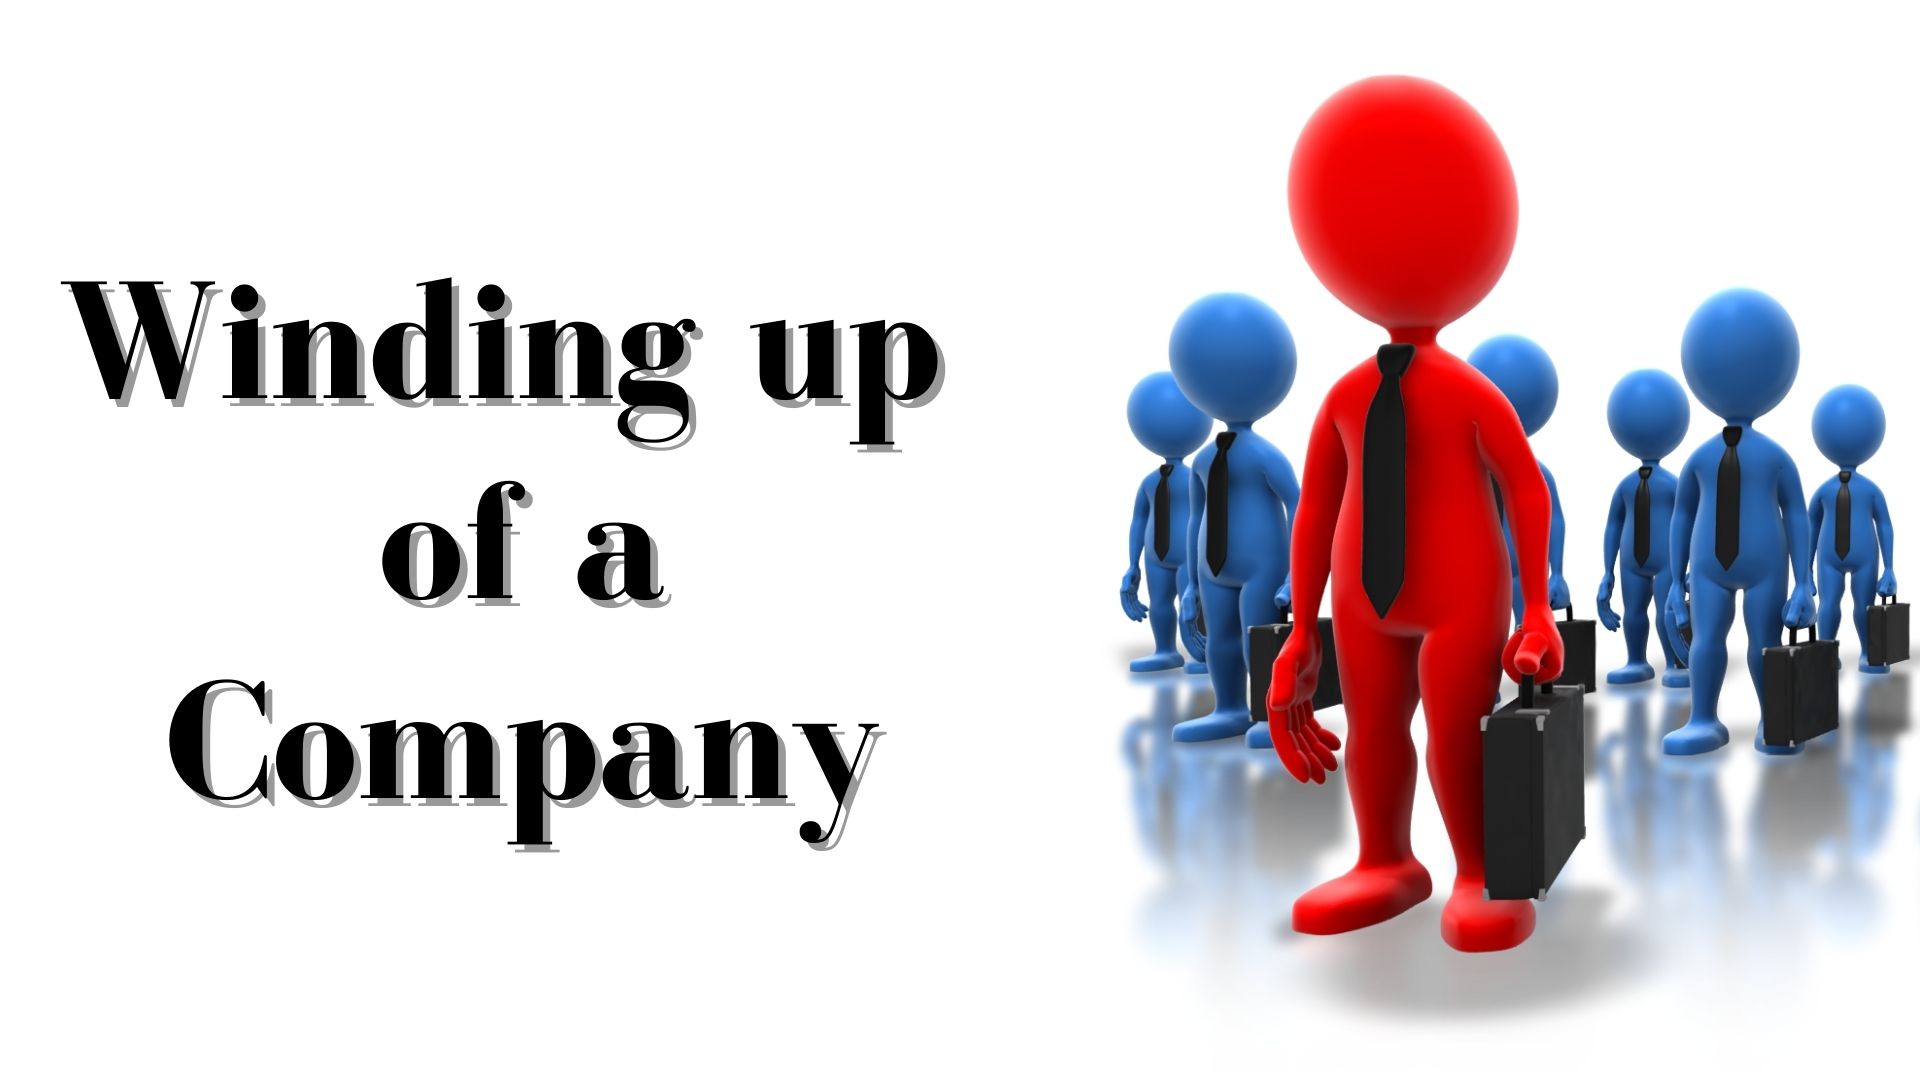 What Are the Grounds for Compulsory Winding Up of a Company